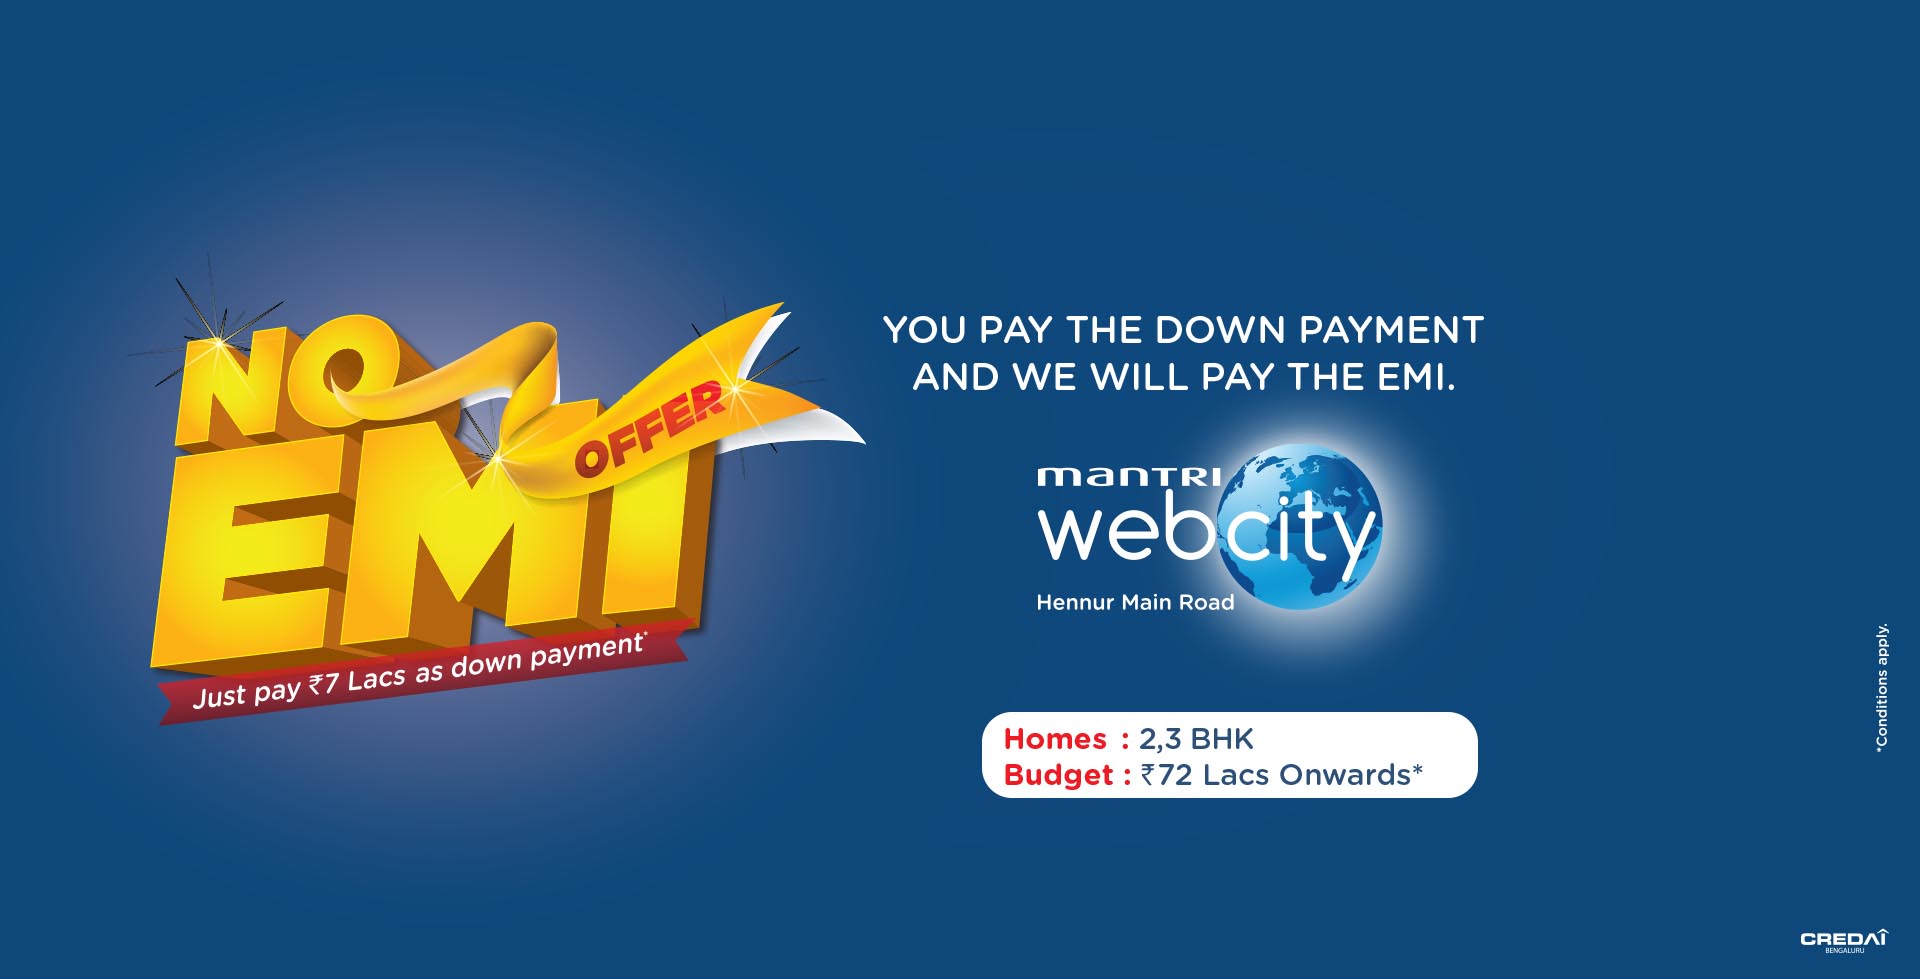 Just pay 7 Lacs as down payment and Mantri Web City will take care of the EMI Update